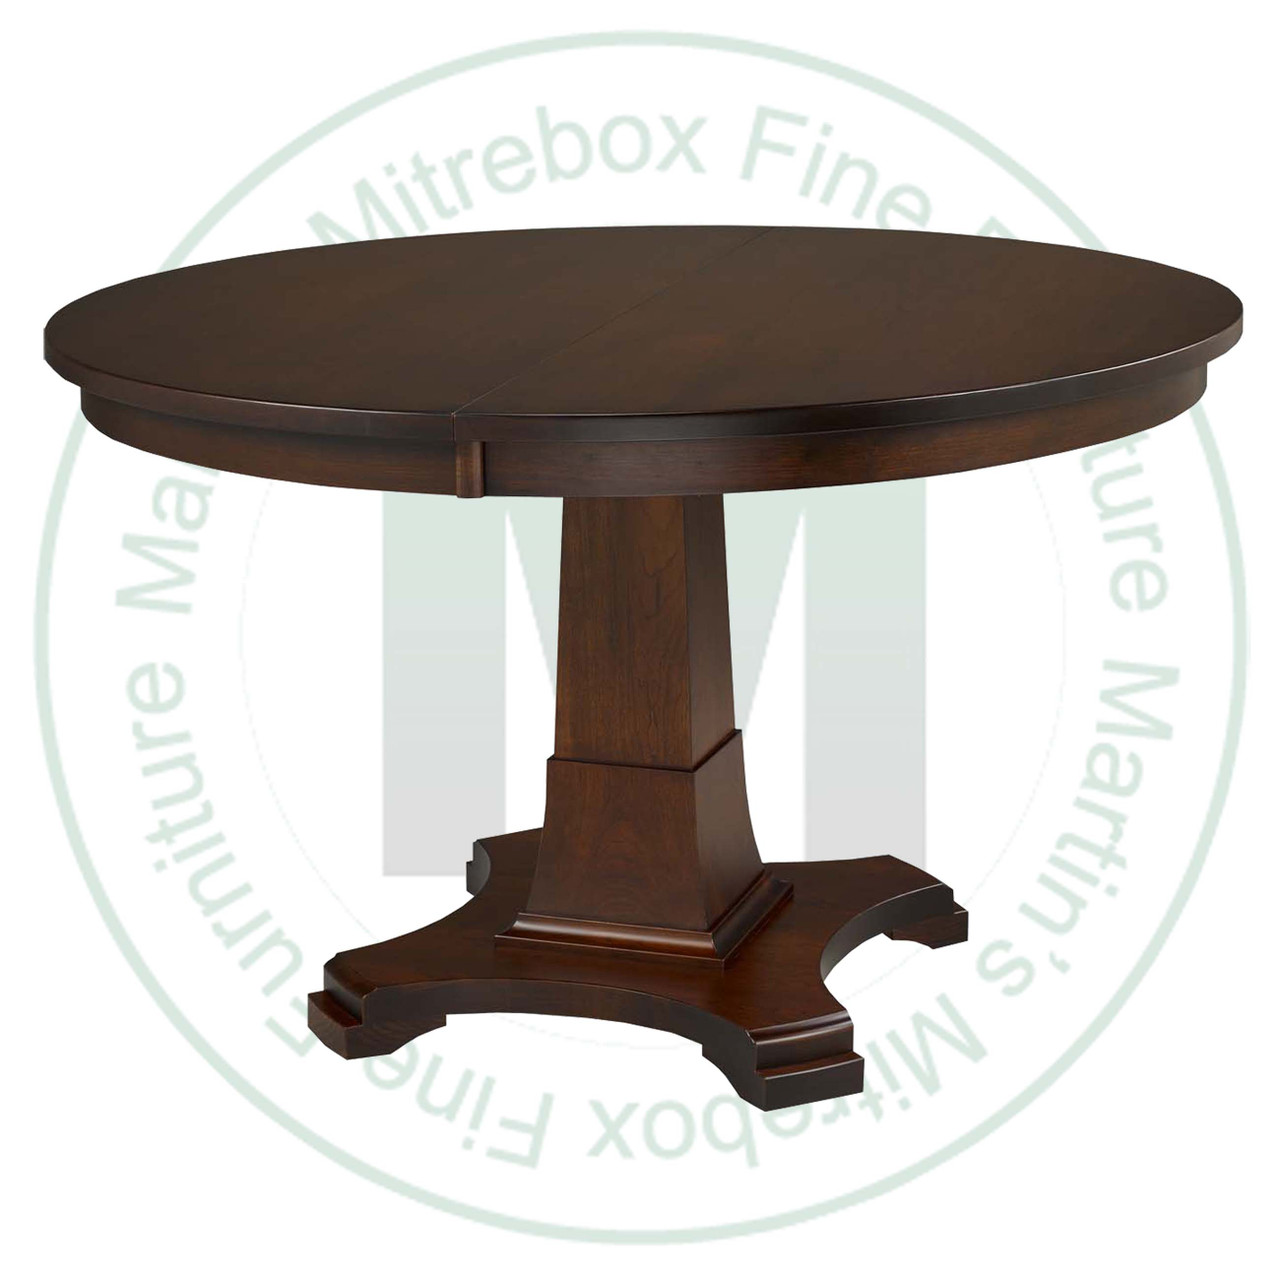 Oak Abbey Single Pedestal Table 54''D x 54''W x 30''H With 2 - 12'' Leaves. Table Has 1'' Thick Top